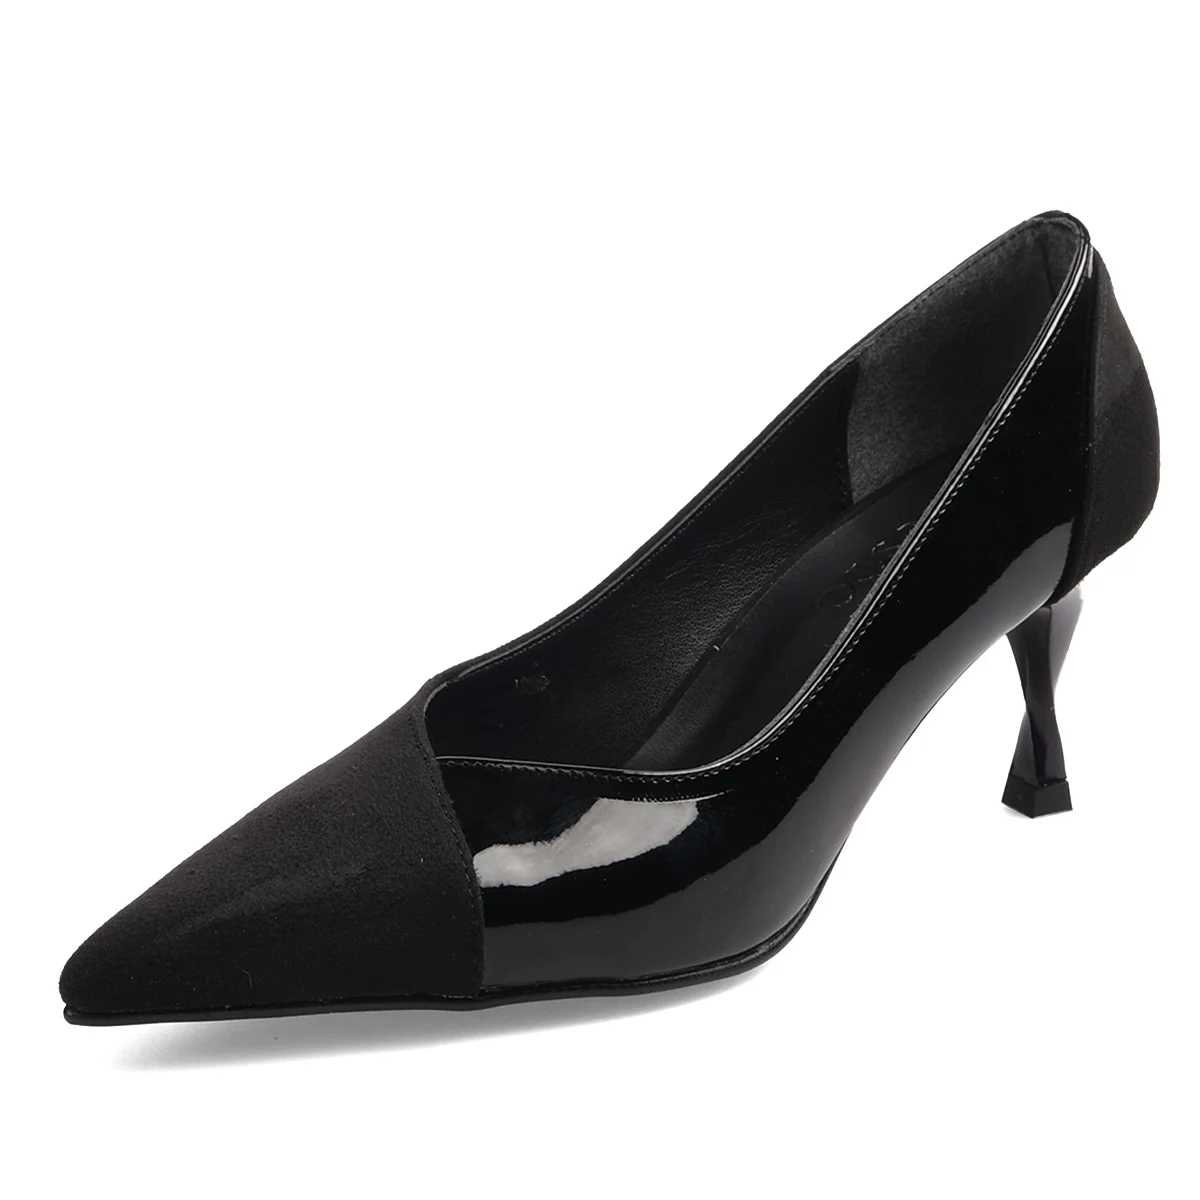 

Mio Gusto Brand WENDY, Black Gray Mink Red Tan, 6Cm Heel Height, top Quality Fashion Stiletto Pumps Shoes